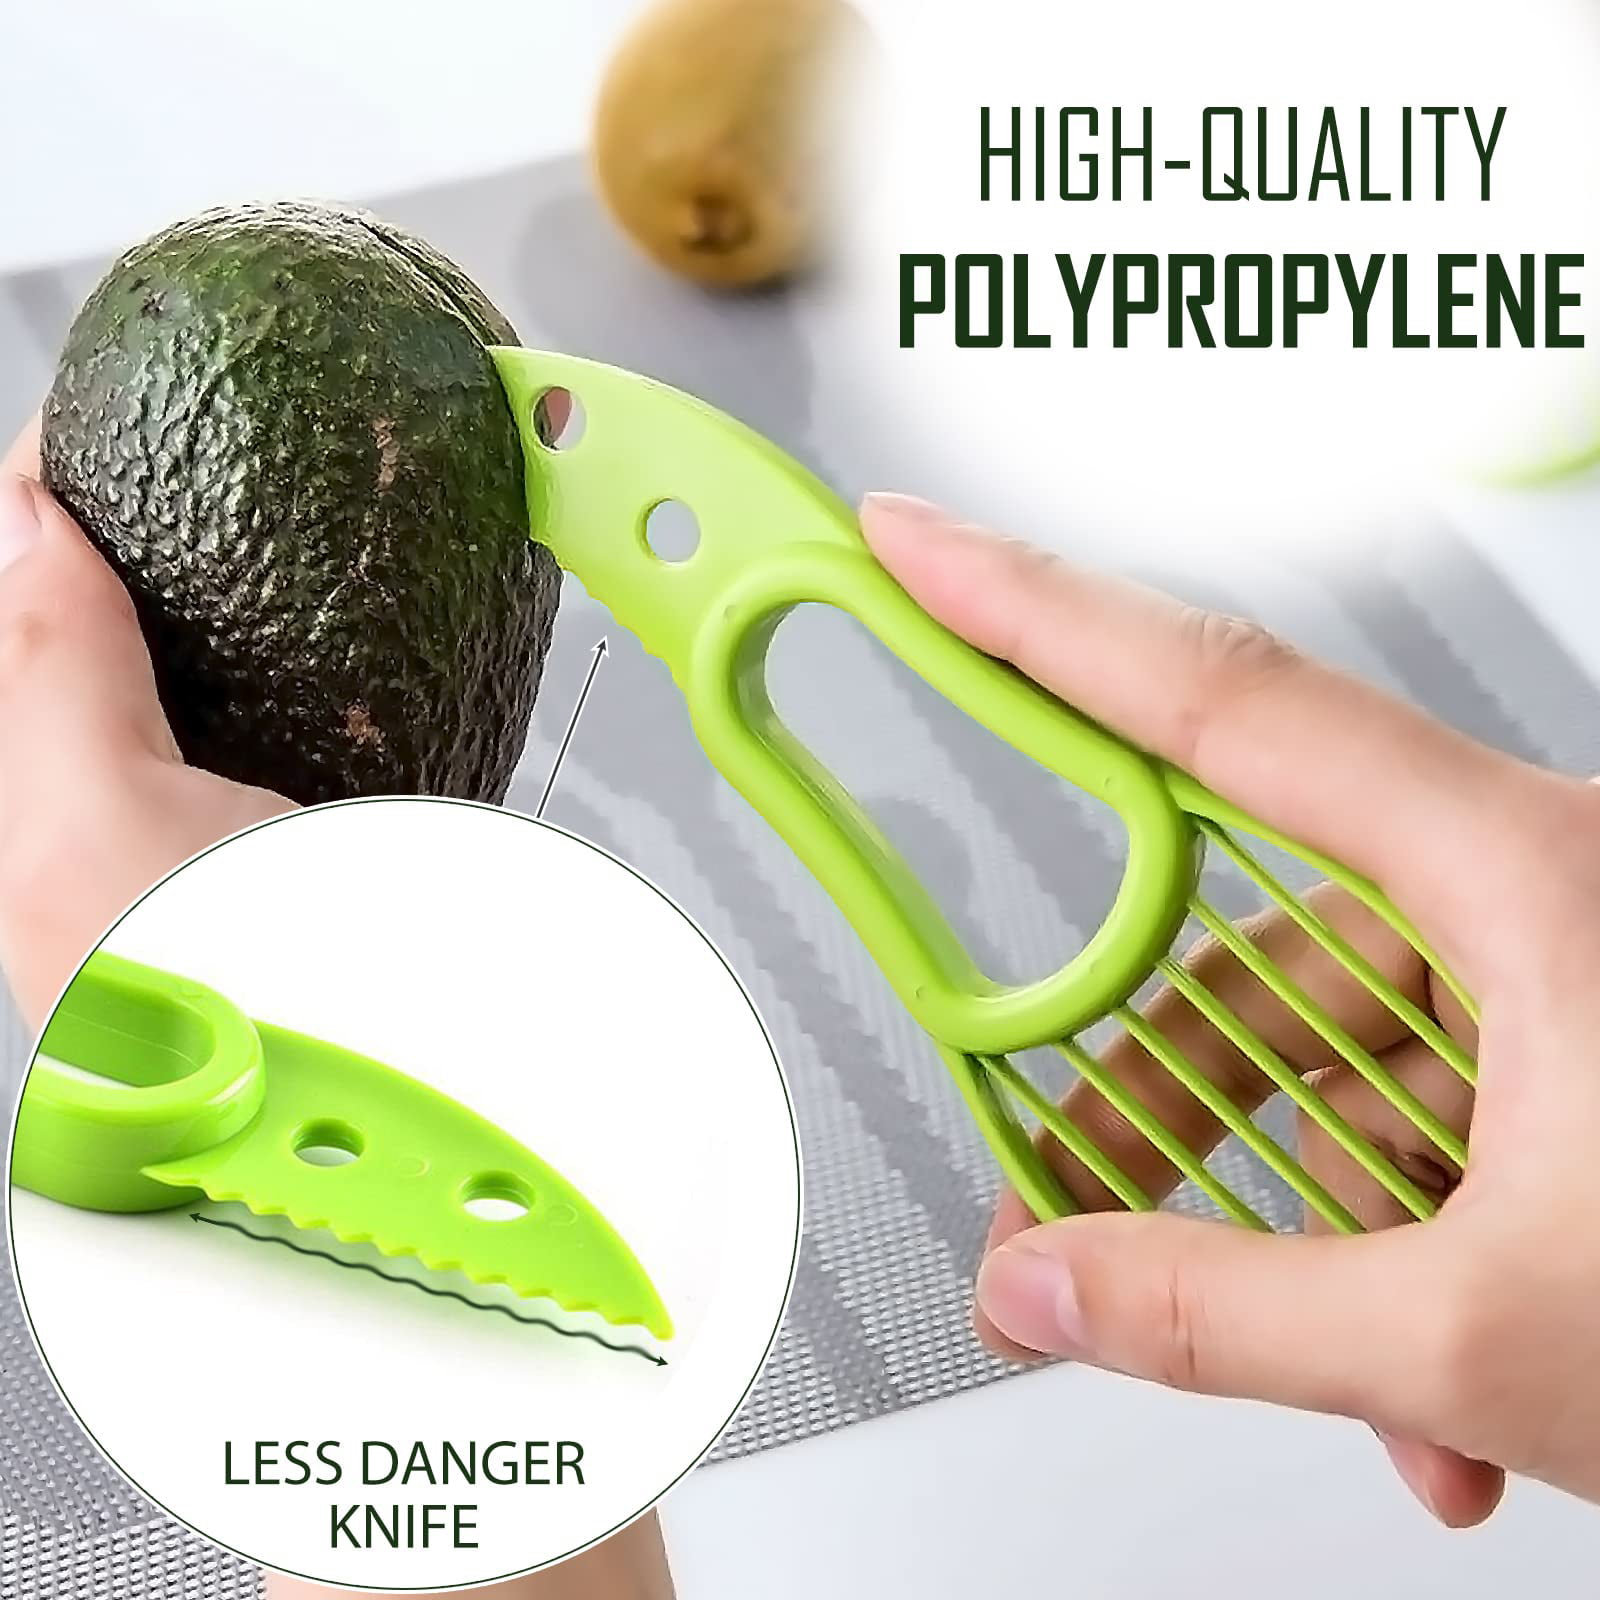 Avocado Slicer, 3-in-1 Avocado Slicer Tool, with comfortable grip,  BPA-free, can be used as a shredder slicer, suitable for dragon fruit kiwi